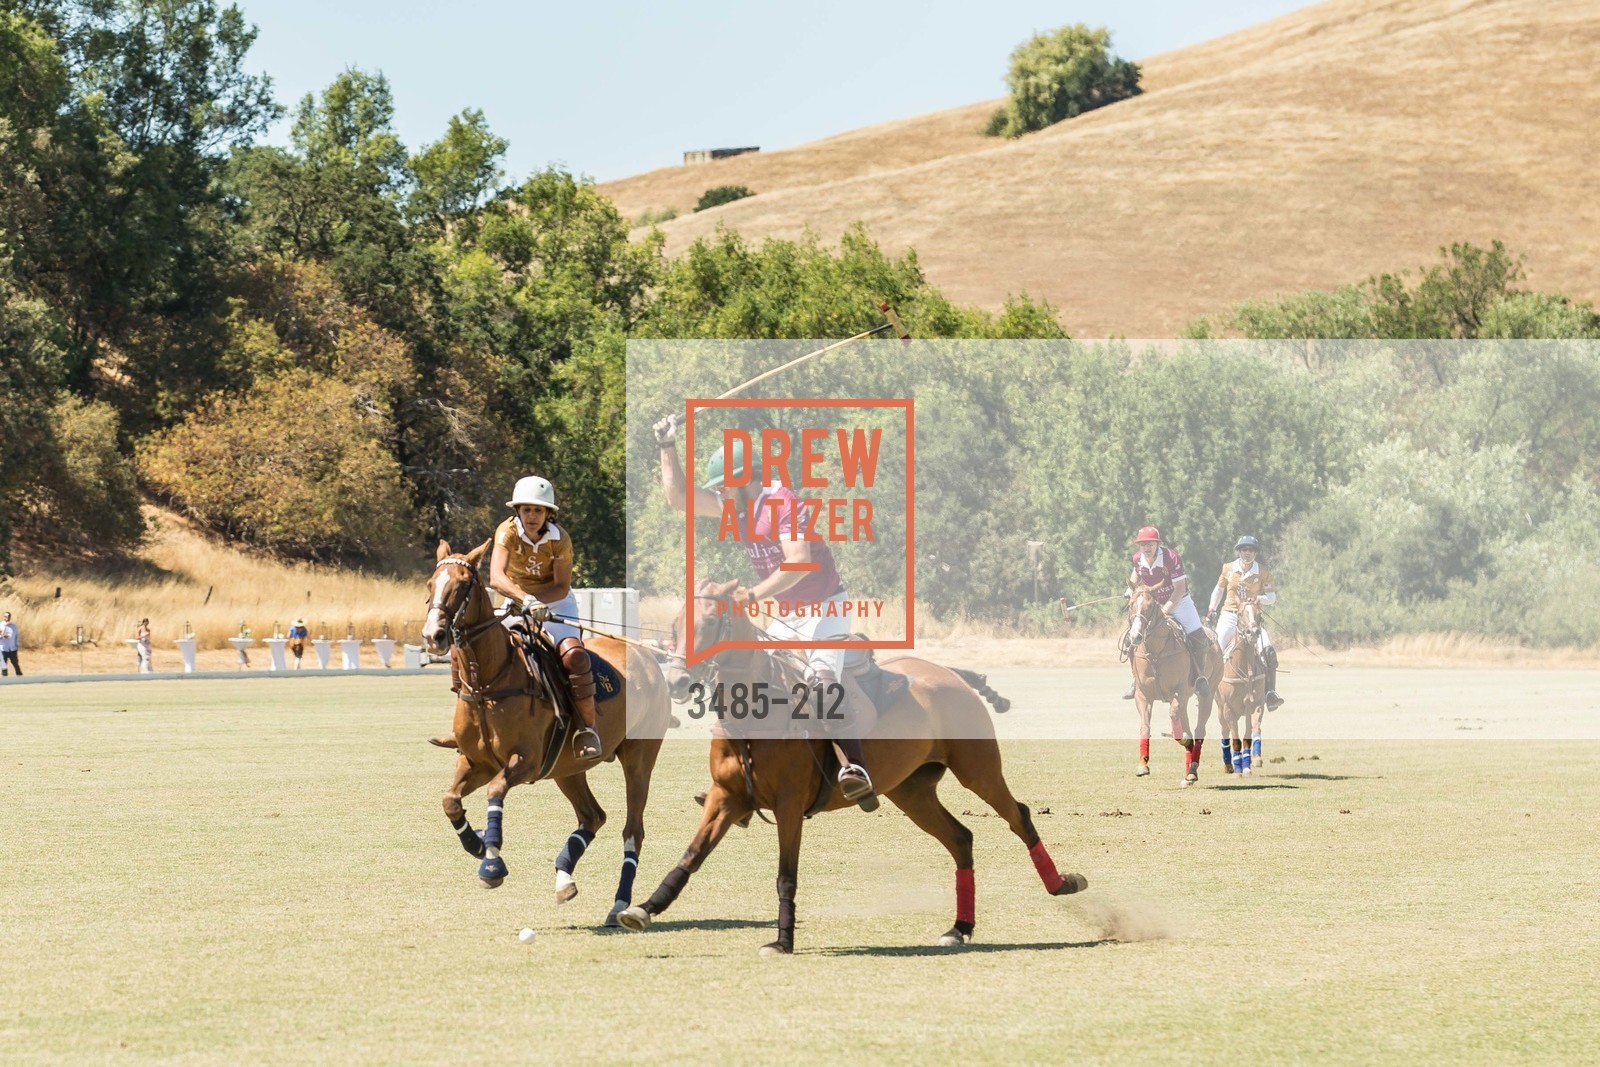 Polo Match at Stick & Ball Oyster Cup Polo Tournament